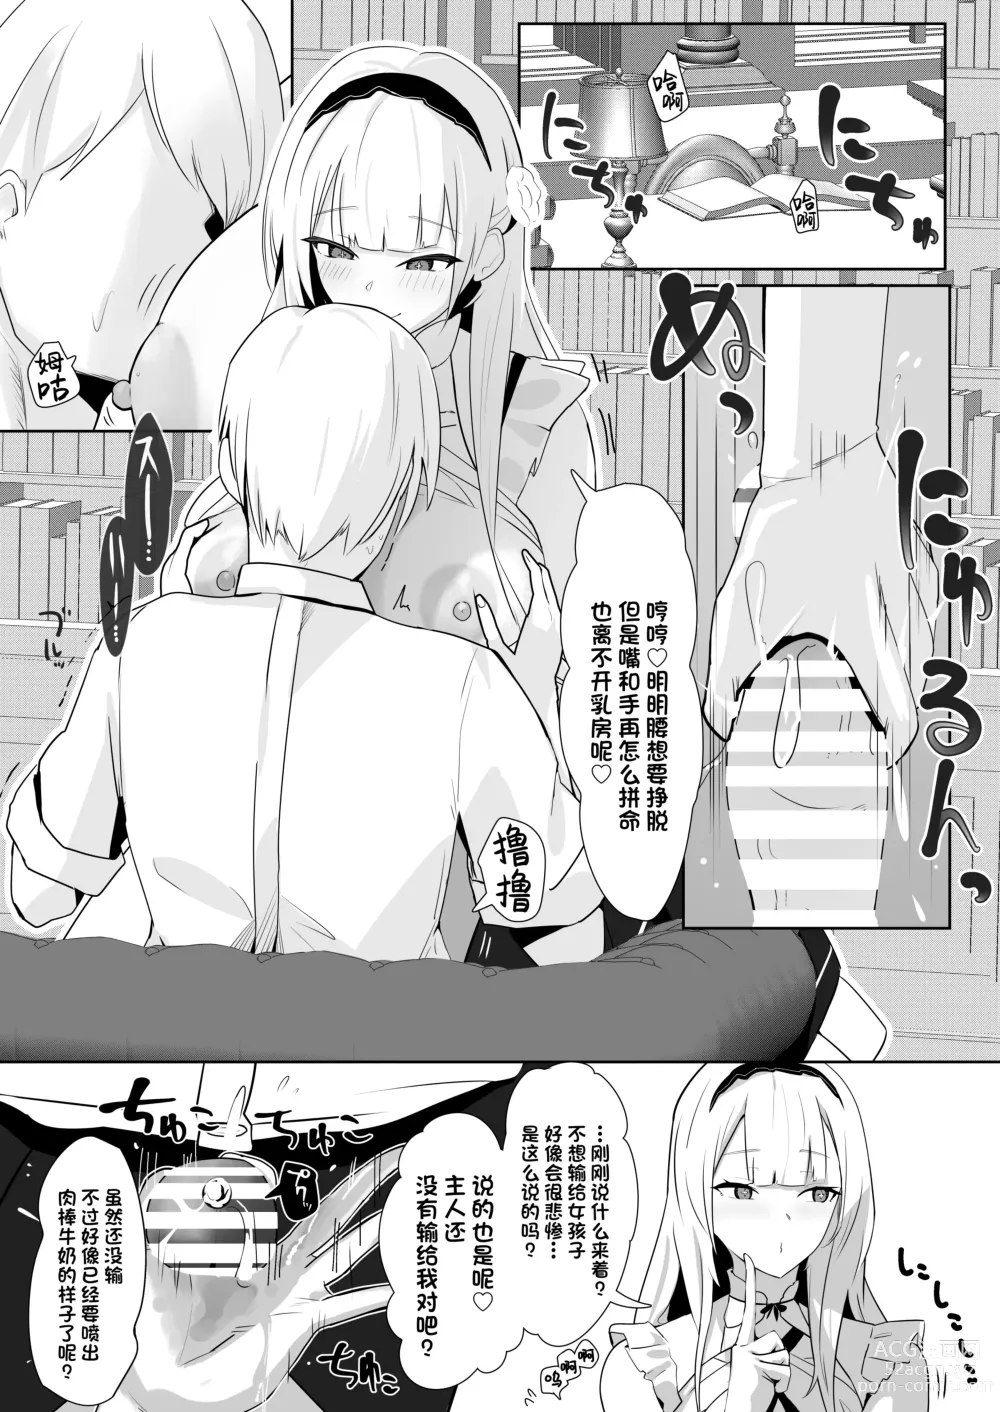 Page 5 of doujinshi 献给你的无上之宝